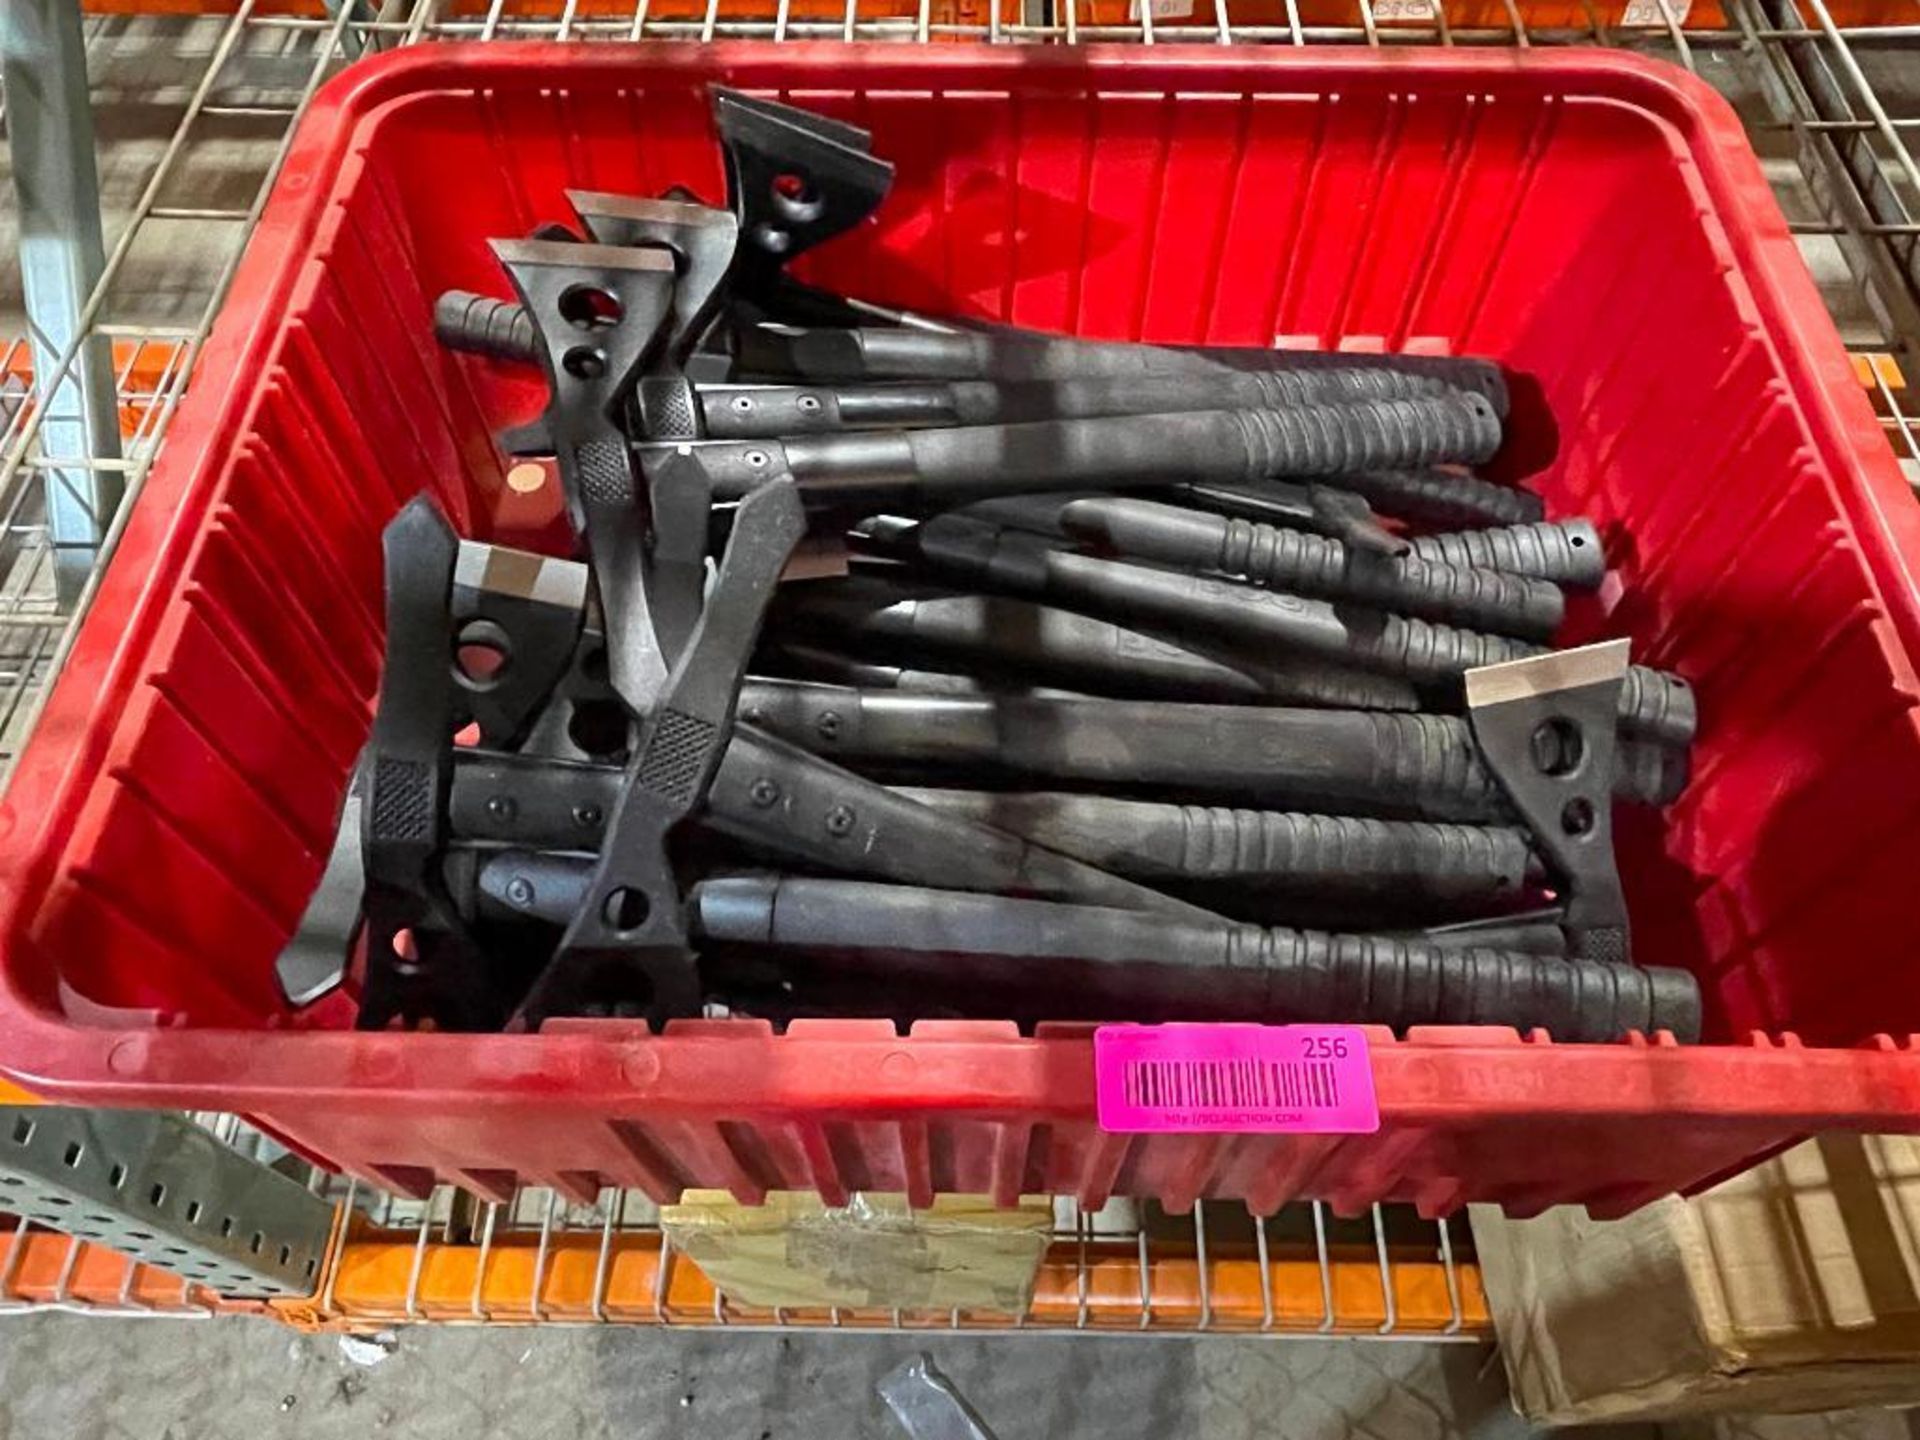 DESCRIPTION: (16) SOG HATCHETS W/ RED PLASTIC TOTE ADDITIONAL INFORMATION RETAILS FOR $66 EACH LOCAT - Image 2 of 3